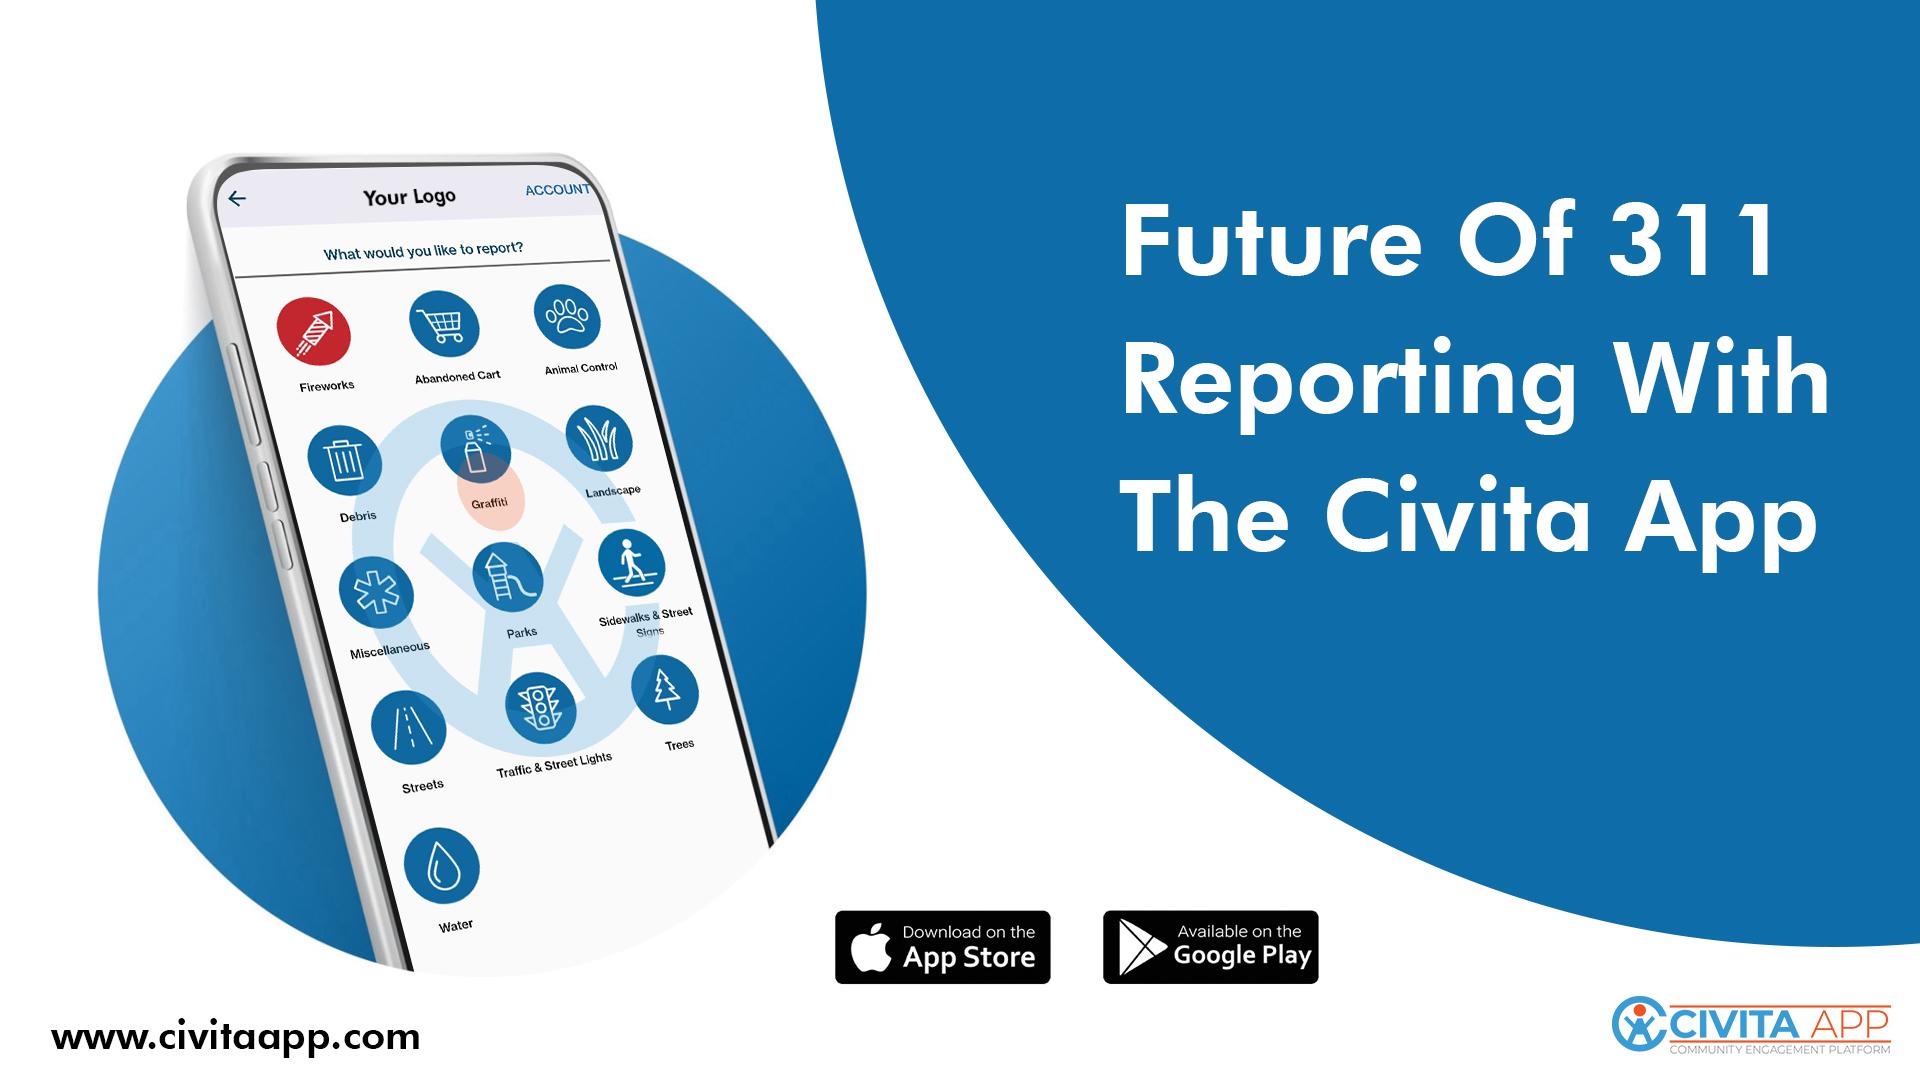 Empowering Communities: The Future of 311 Reporting with the Civita App